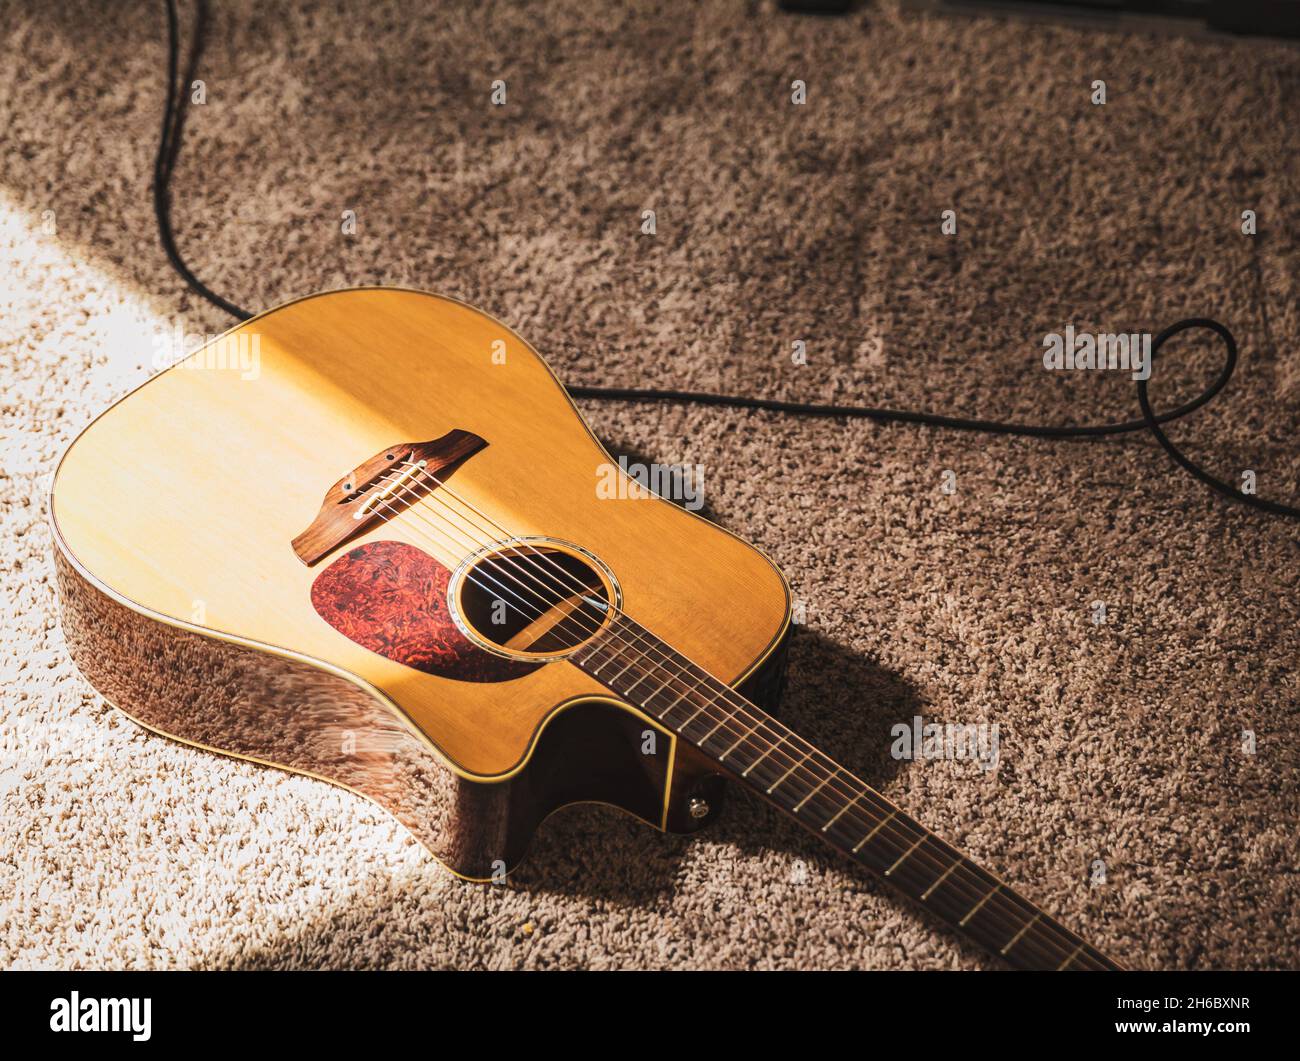 acoustic, art, audio, background, brown, classic, classical, country, entertainment, equipment, folk, guitar, home recording, home recording studio, h Stock Photo